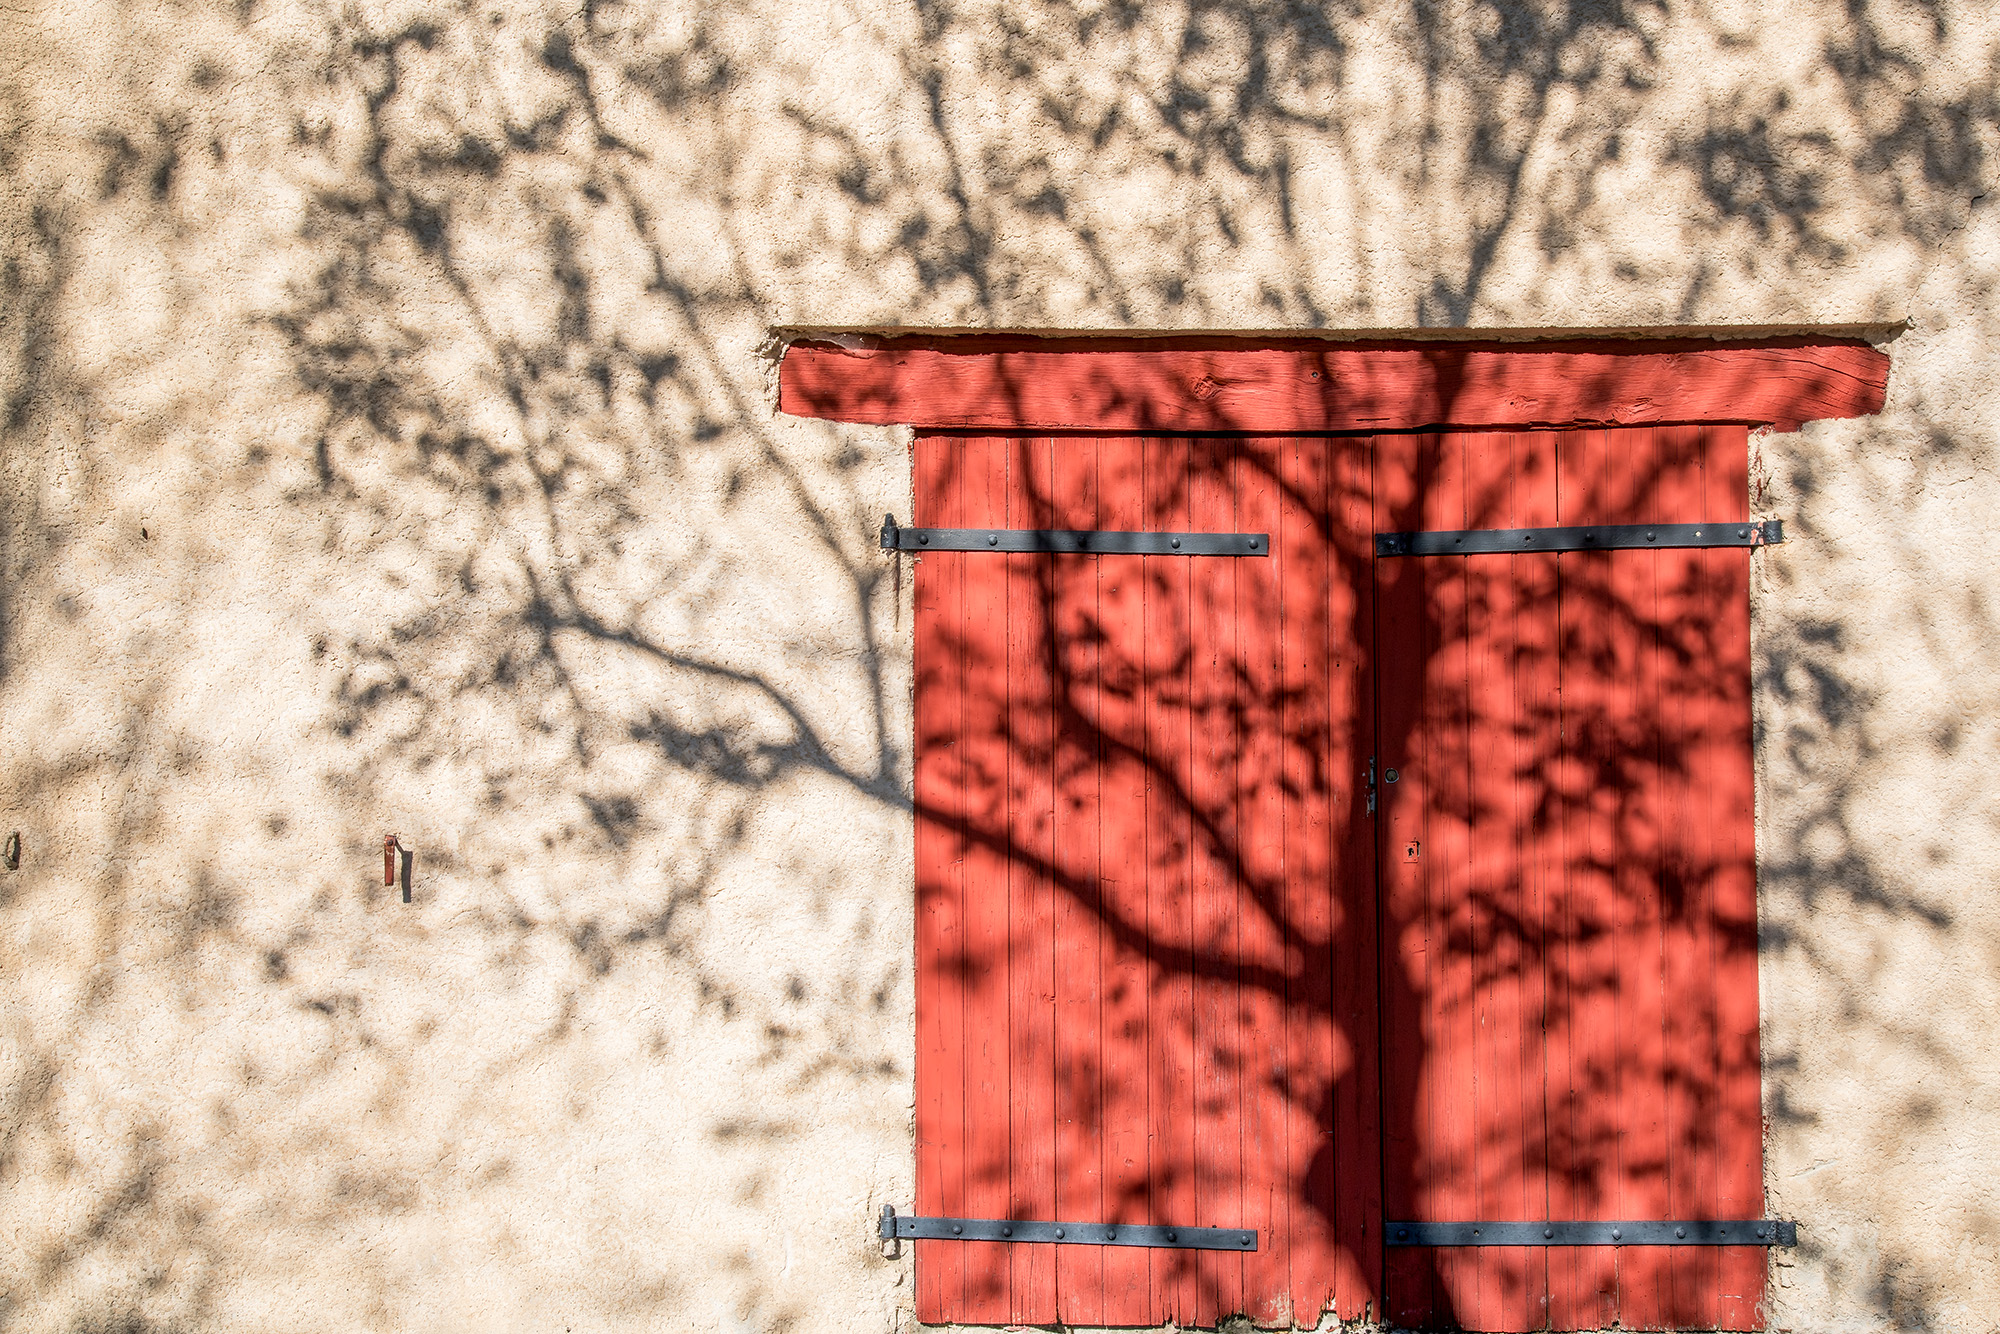 Early in the morning, I stumbled upon this powerful image in Moustiers Ste Marie, France. A red door and a brilliant tree shadow...